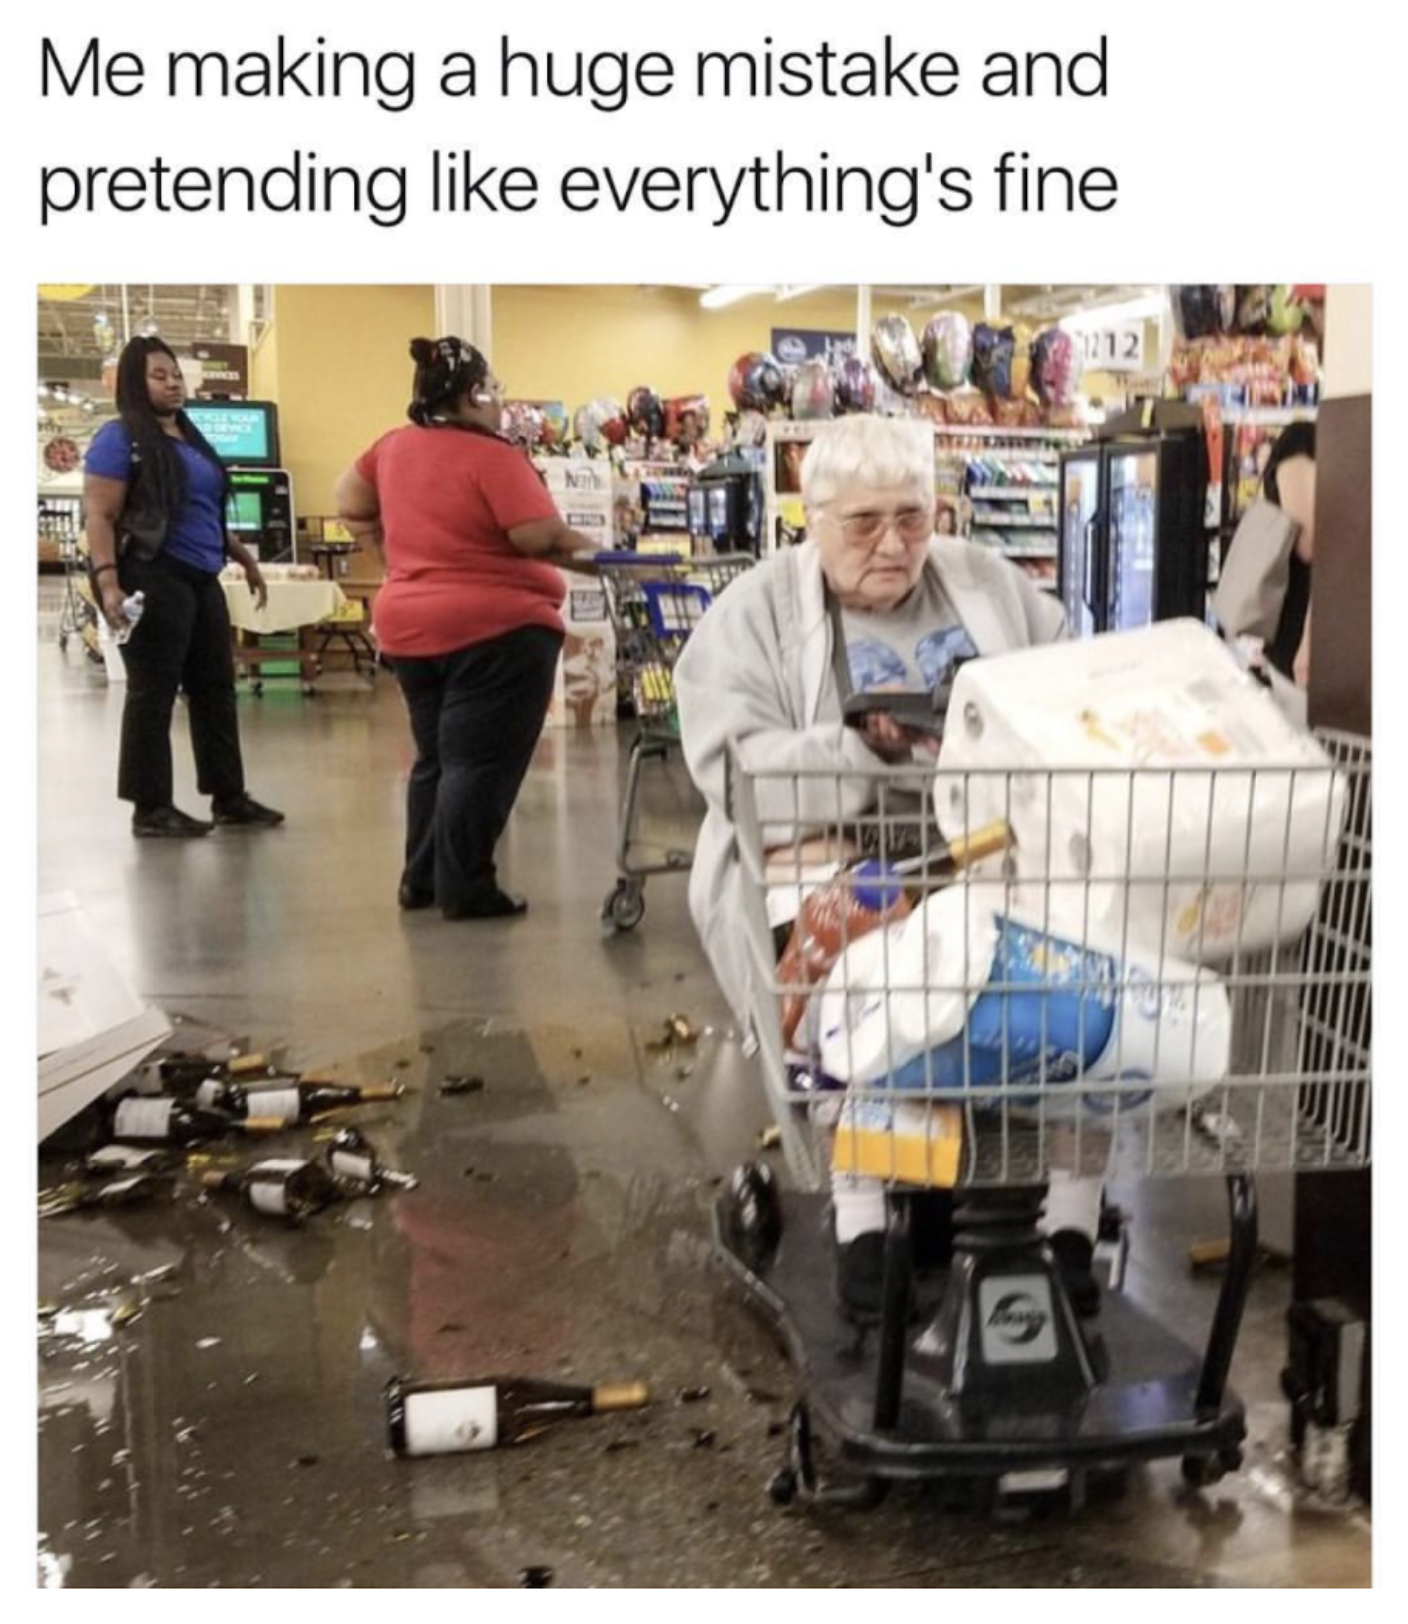 grocery and old lady - Me making a huge mistake and pretending everything's fine El